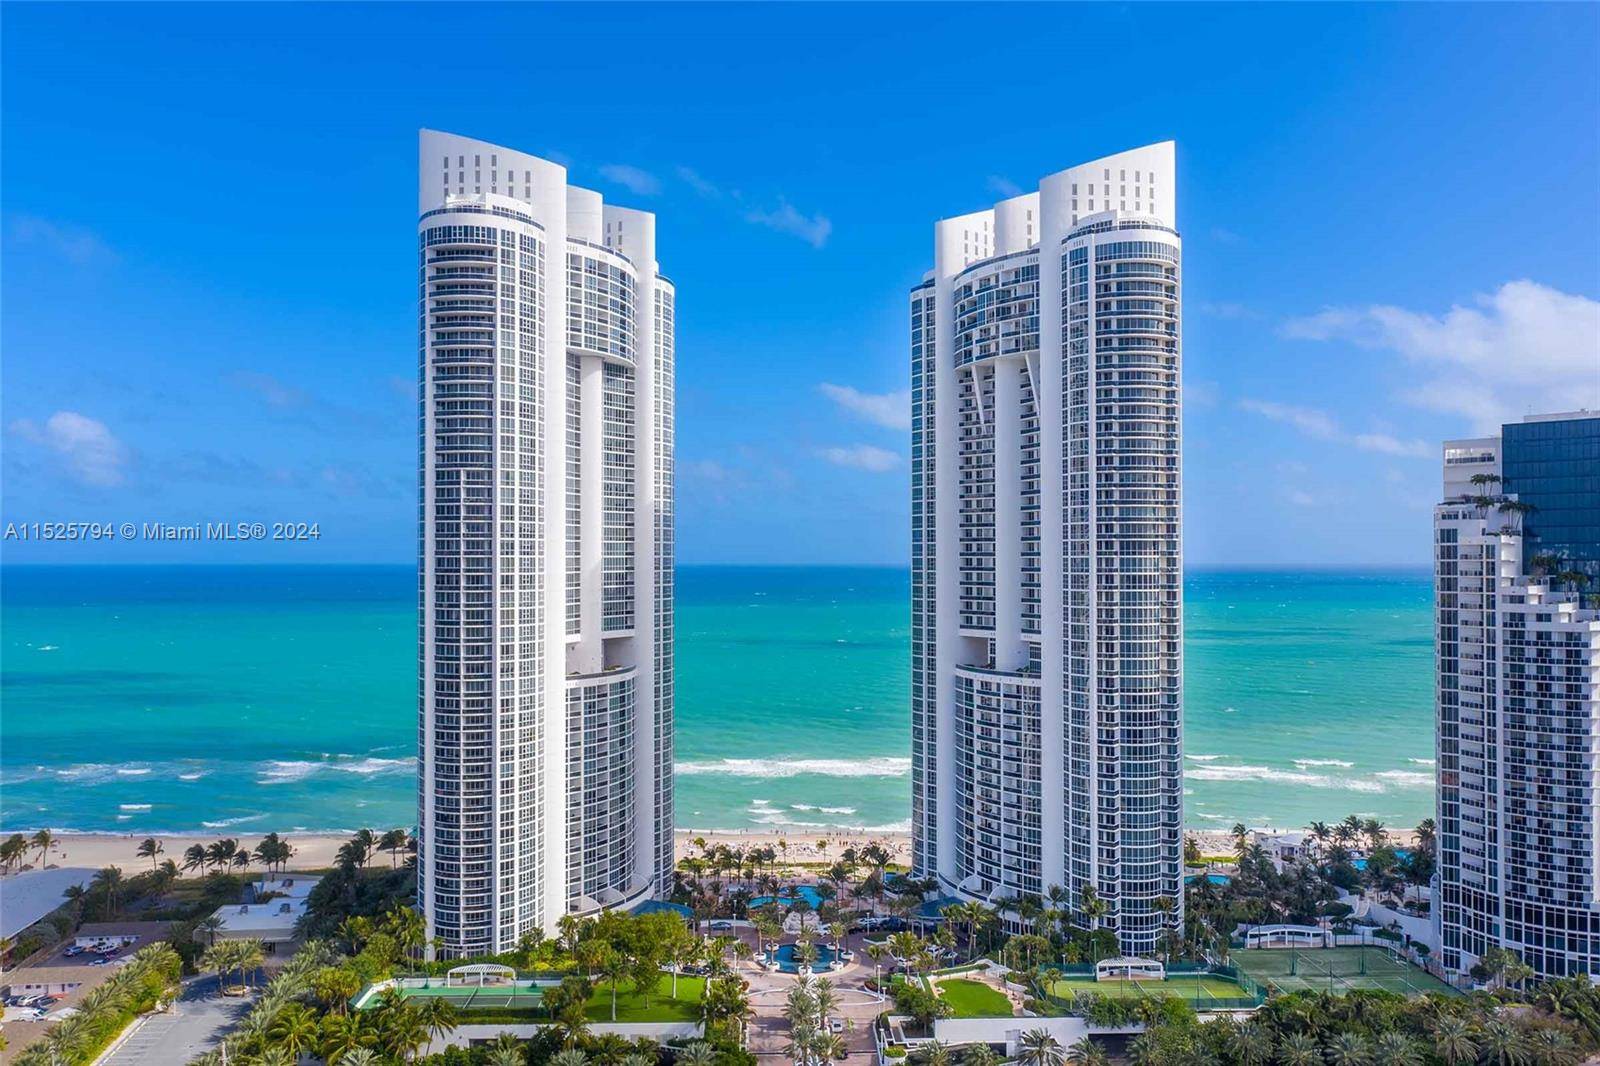 Oceanfront flow through unit at Trump Palace featuring 2 separate balconies offering panoramic ocean views to the SE direct intracoastal views to the NW.